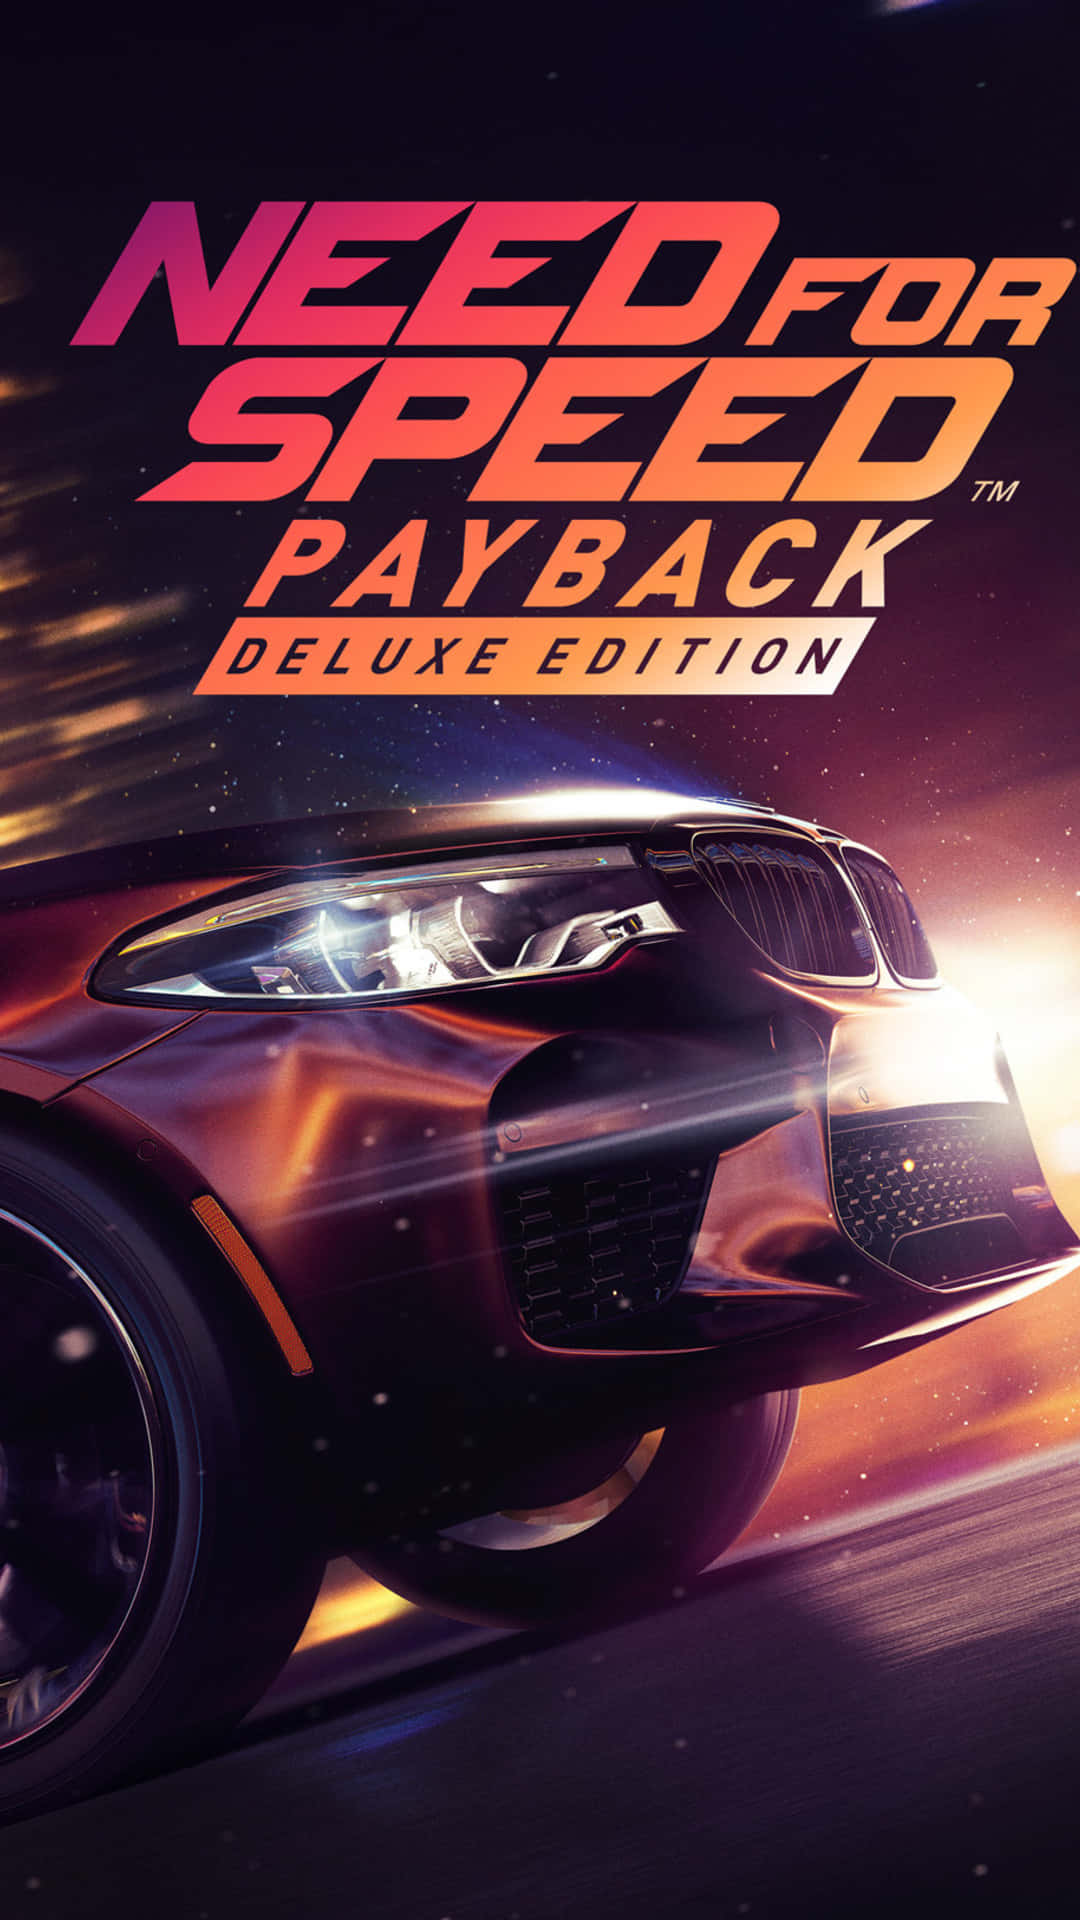 Pixel3 Bakgrund Med Need For Speed Payback Deluxe Edition Omslag.